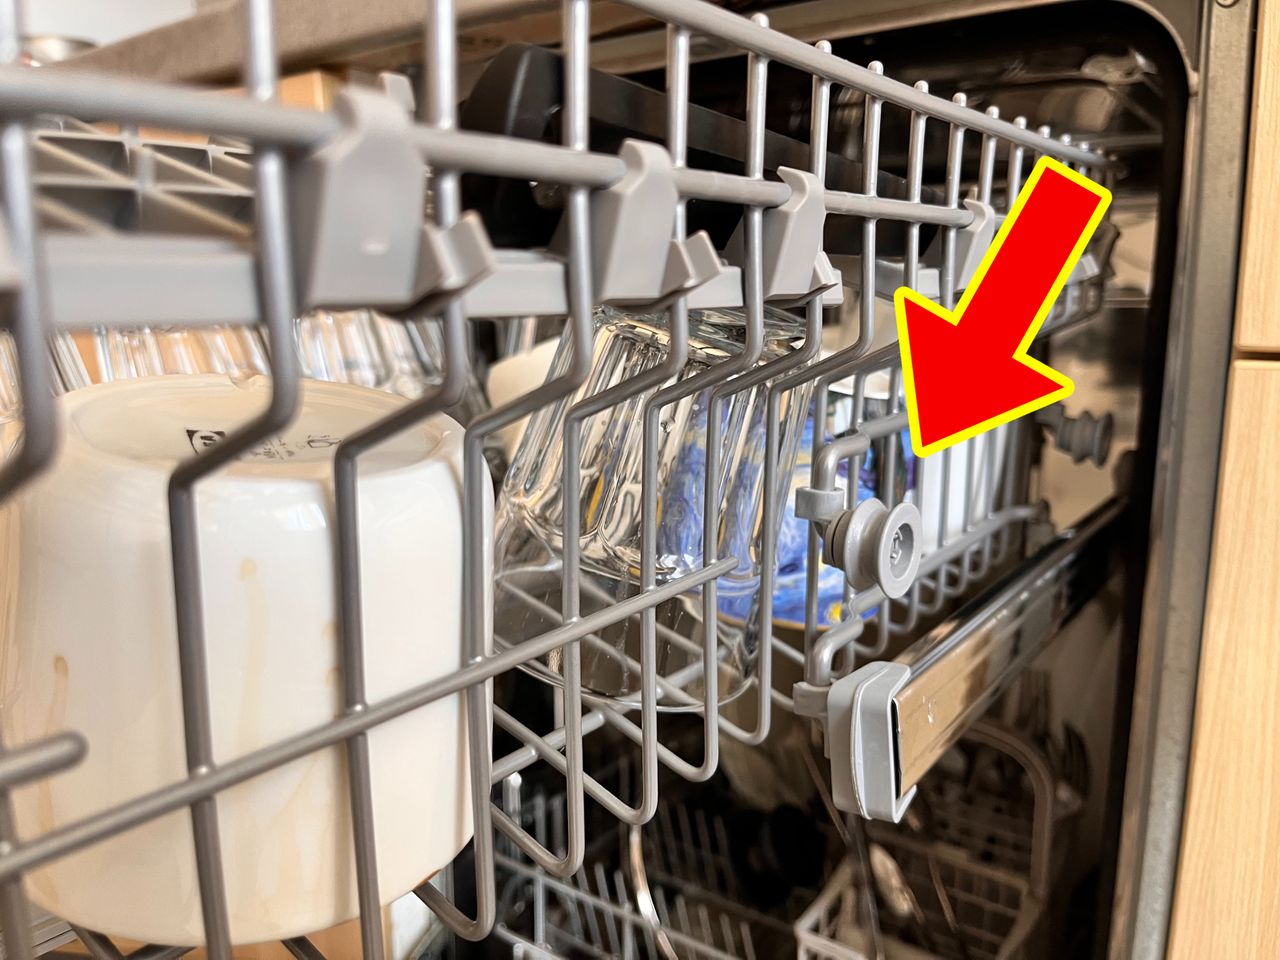 Additional wheels in the dishwasher.